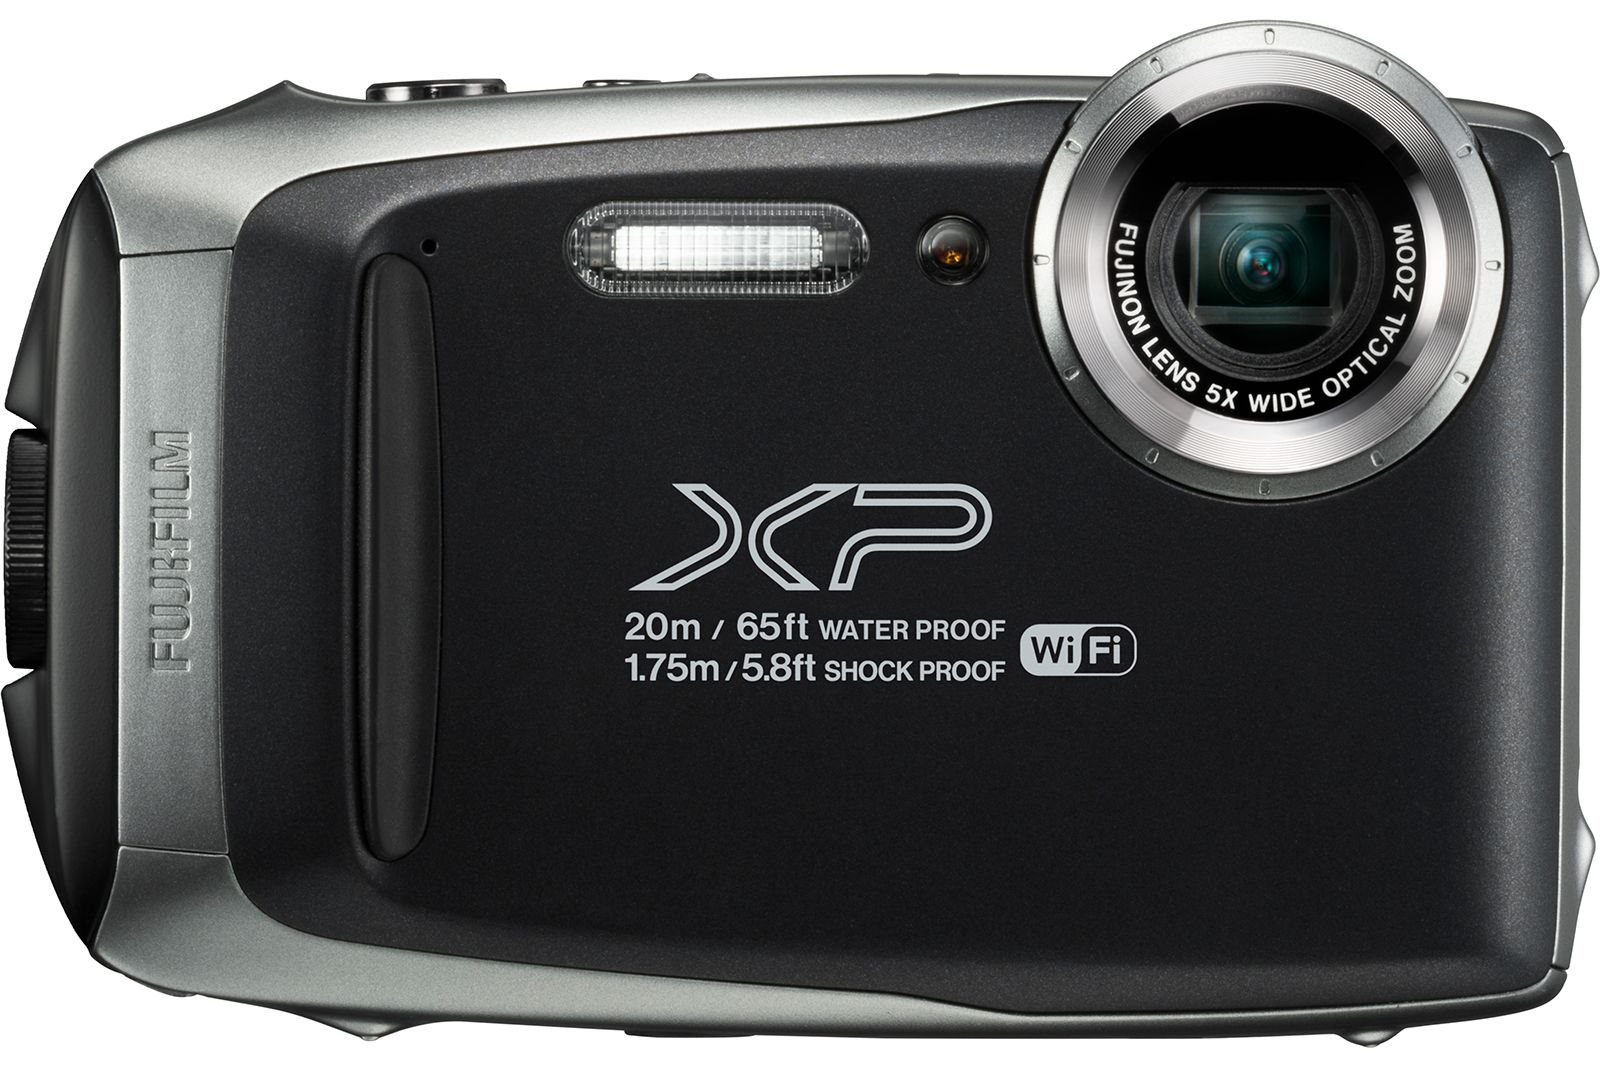 FujiFilm FinePix XP130 is a compact rugged point-and-shoot camera image 1